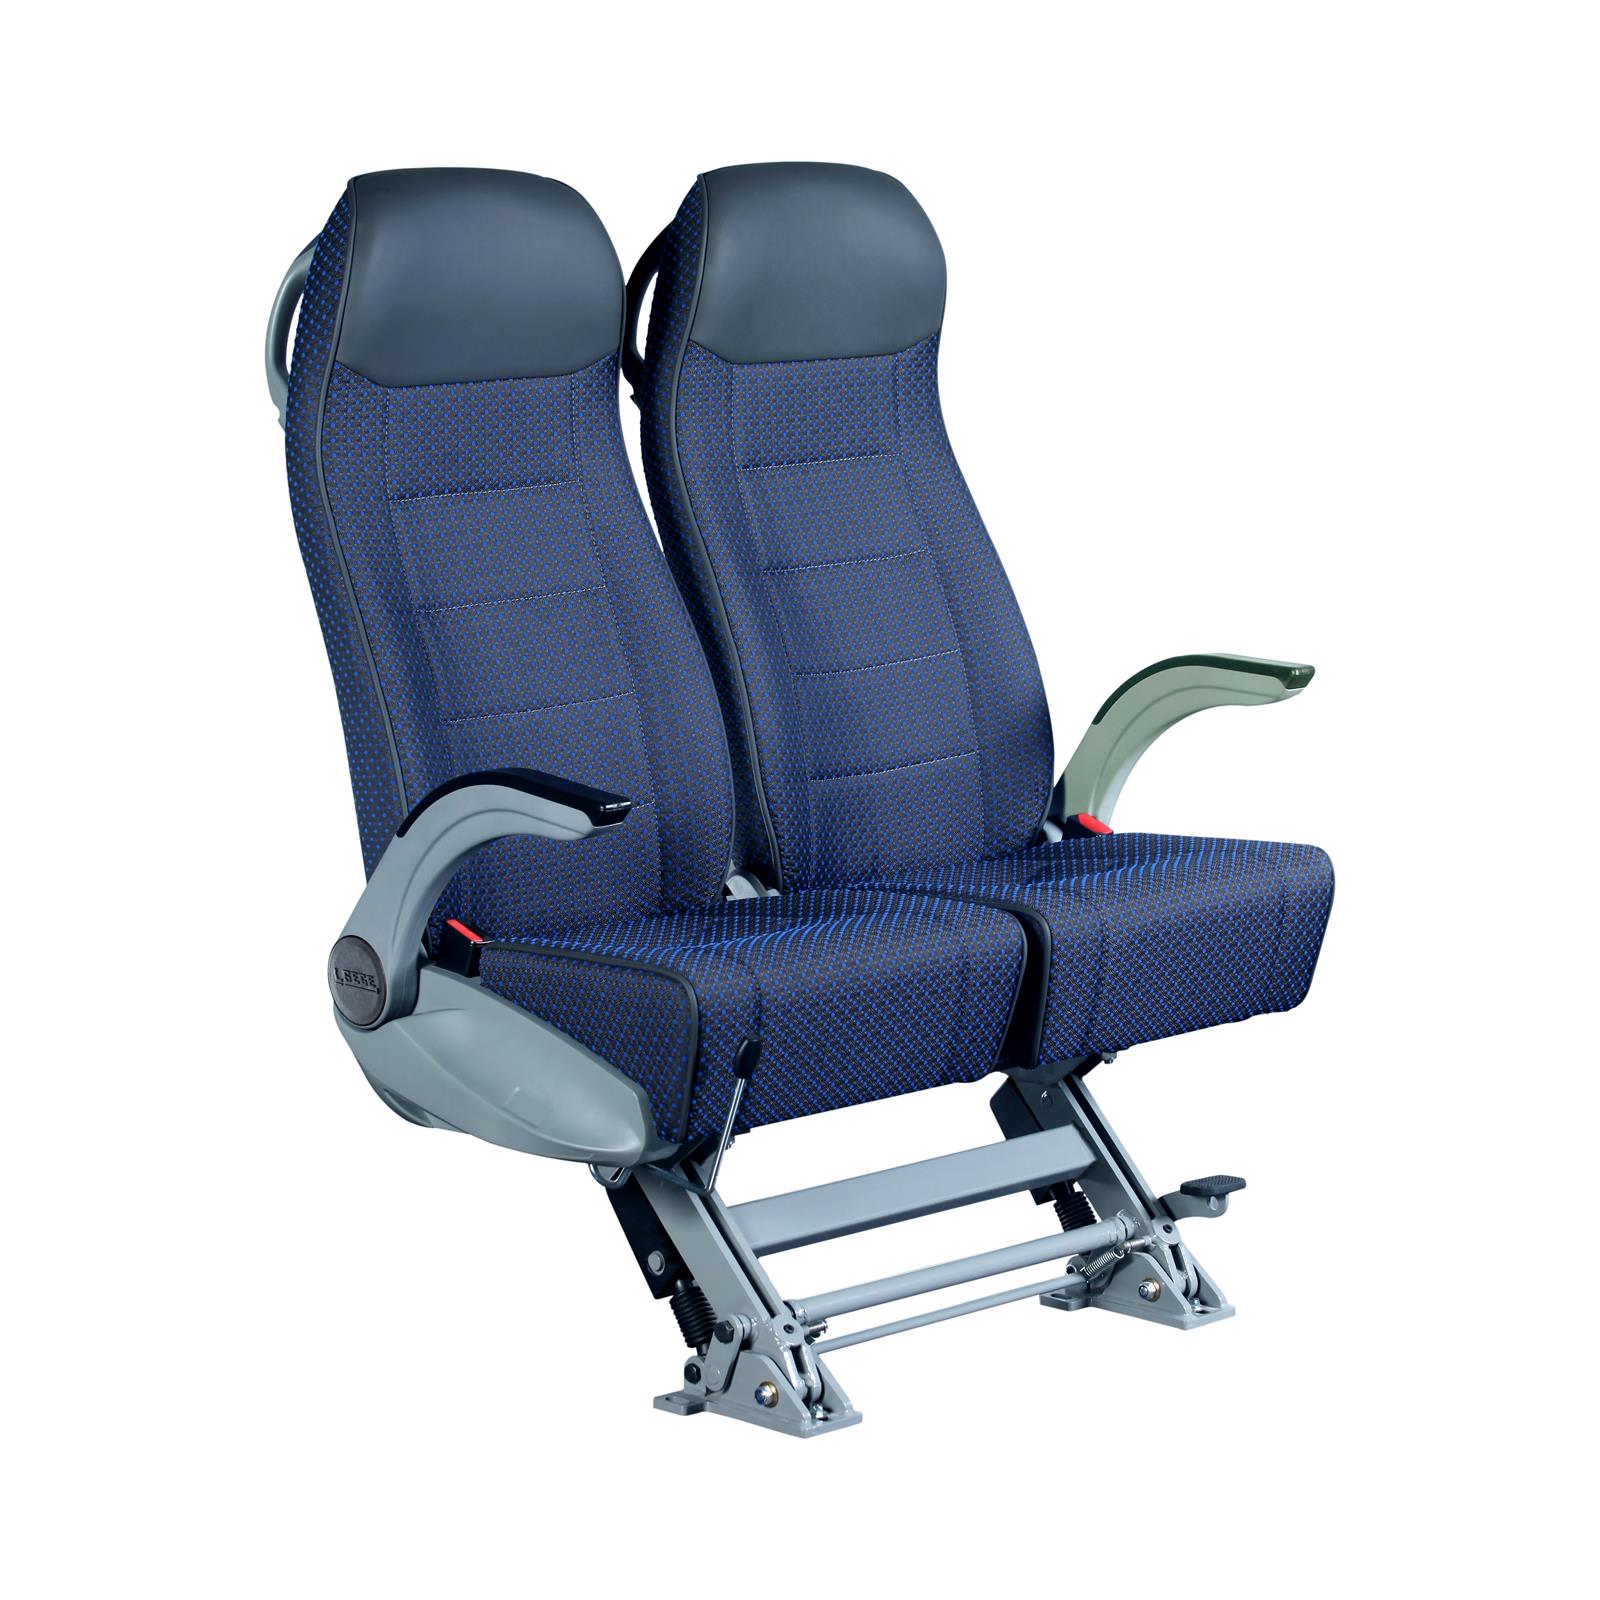 image shows Sege Special Truva Bus Seat